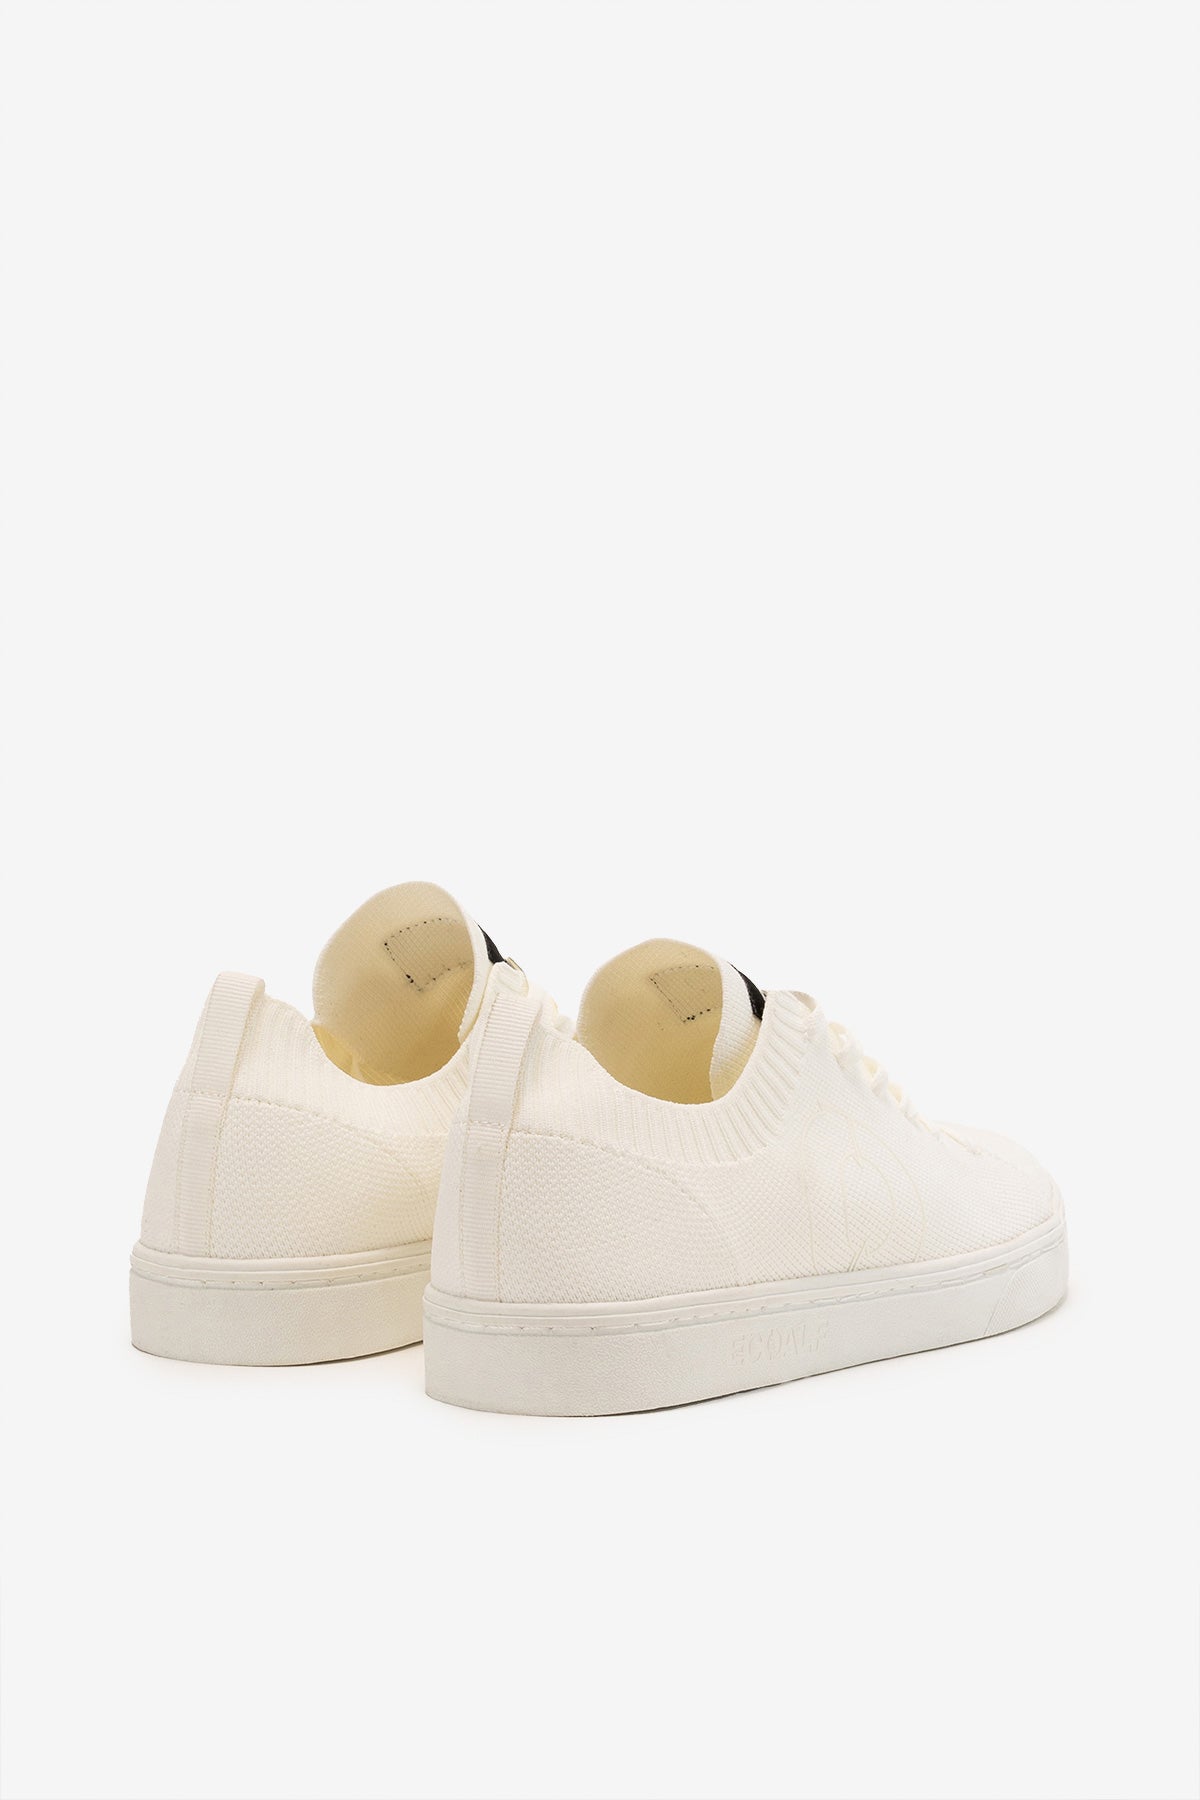 CHAUSSURES JERSEY BLANCHES